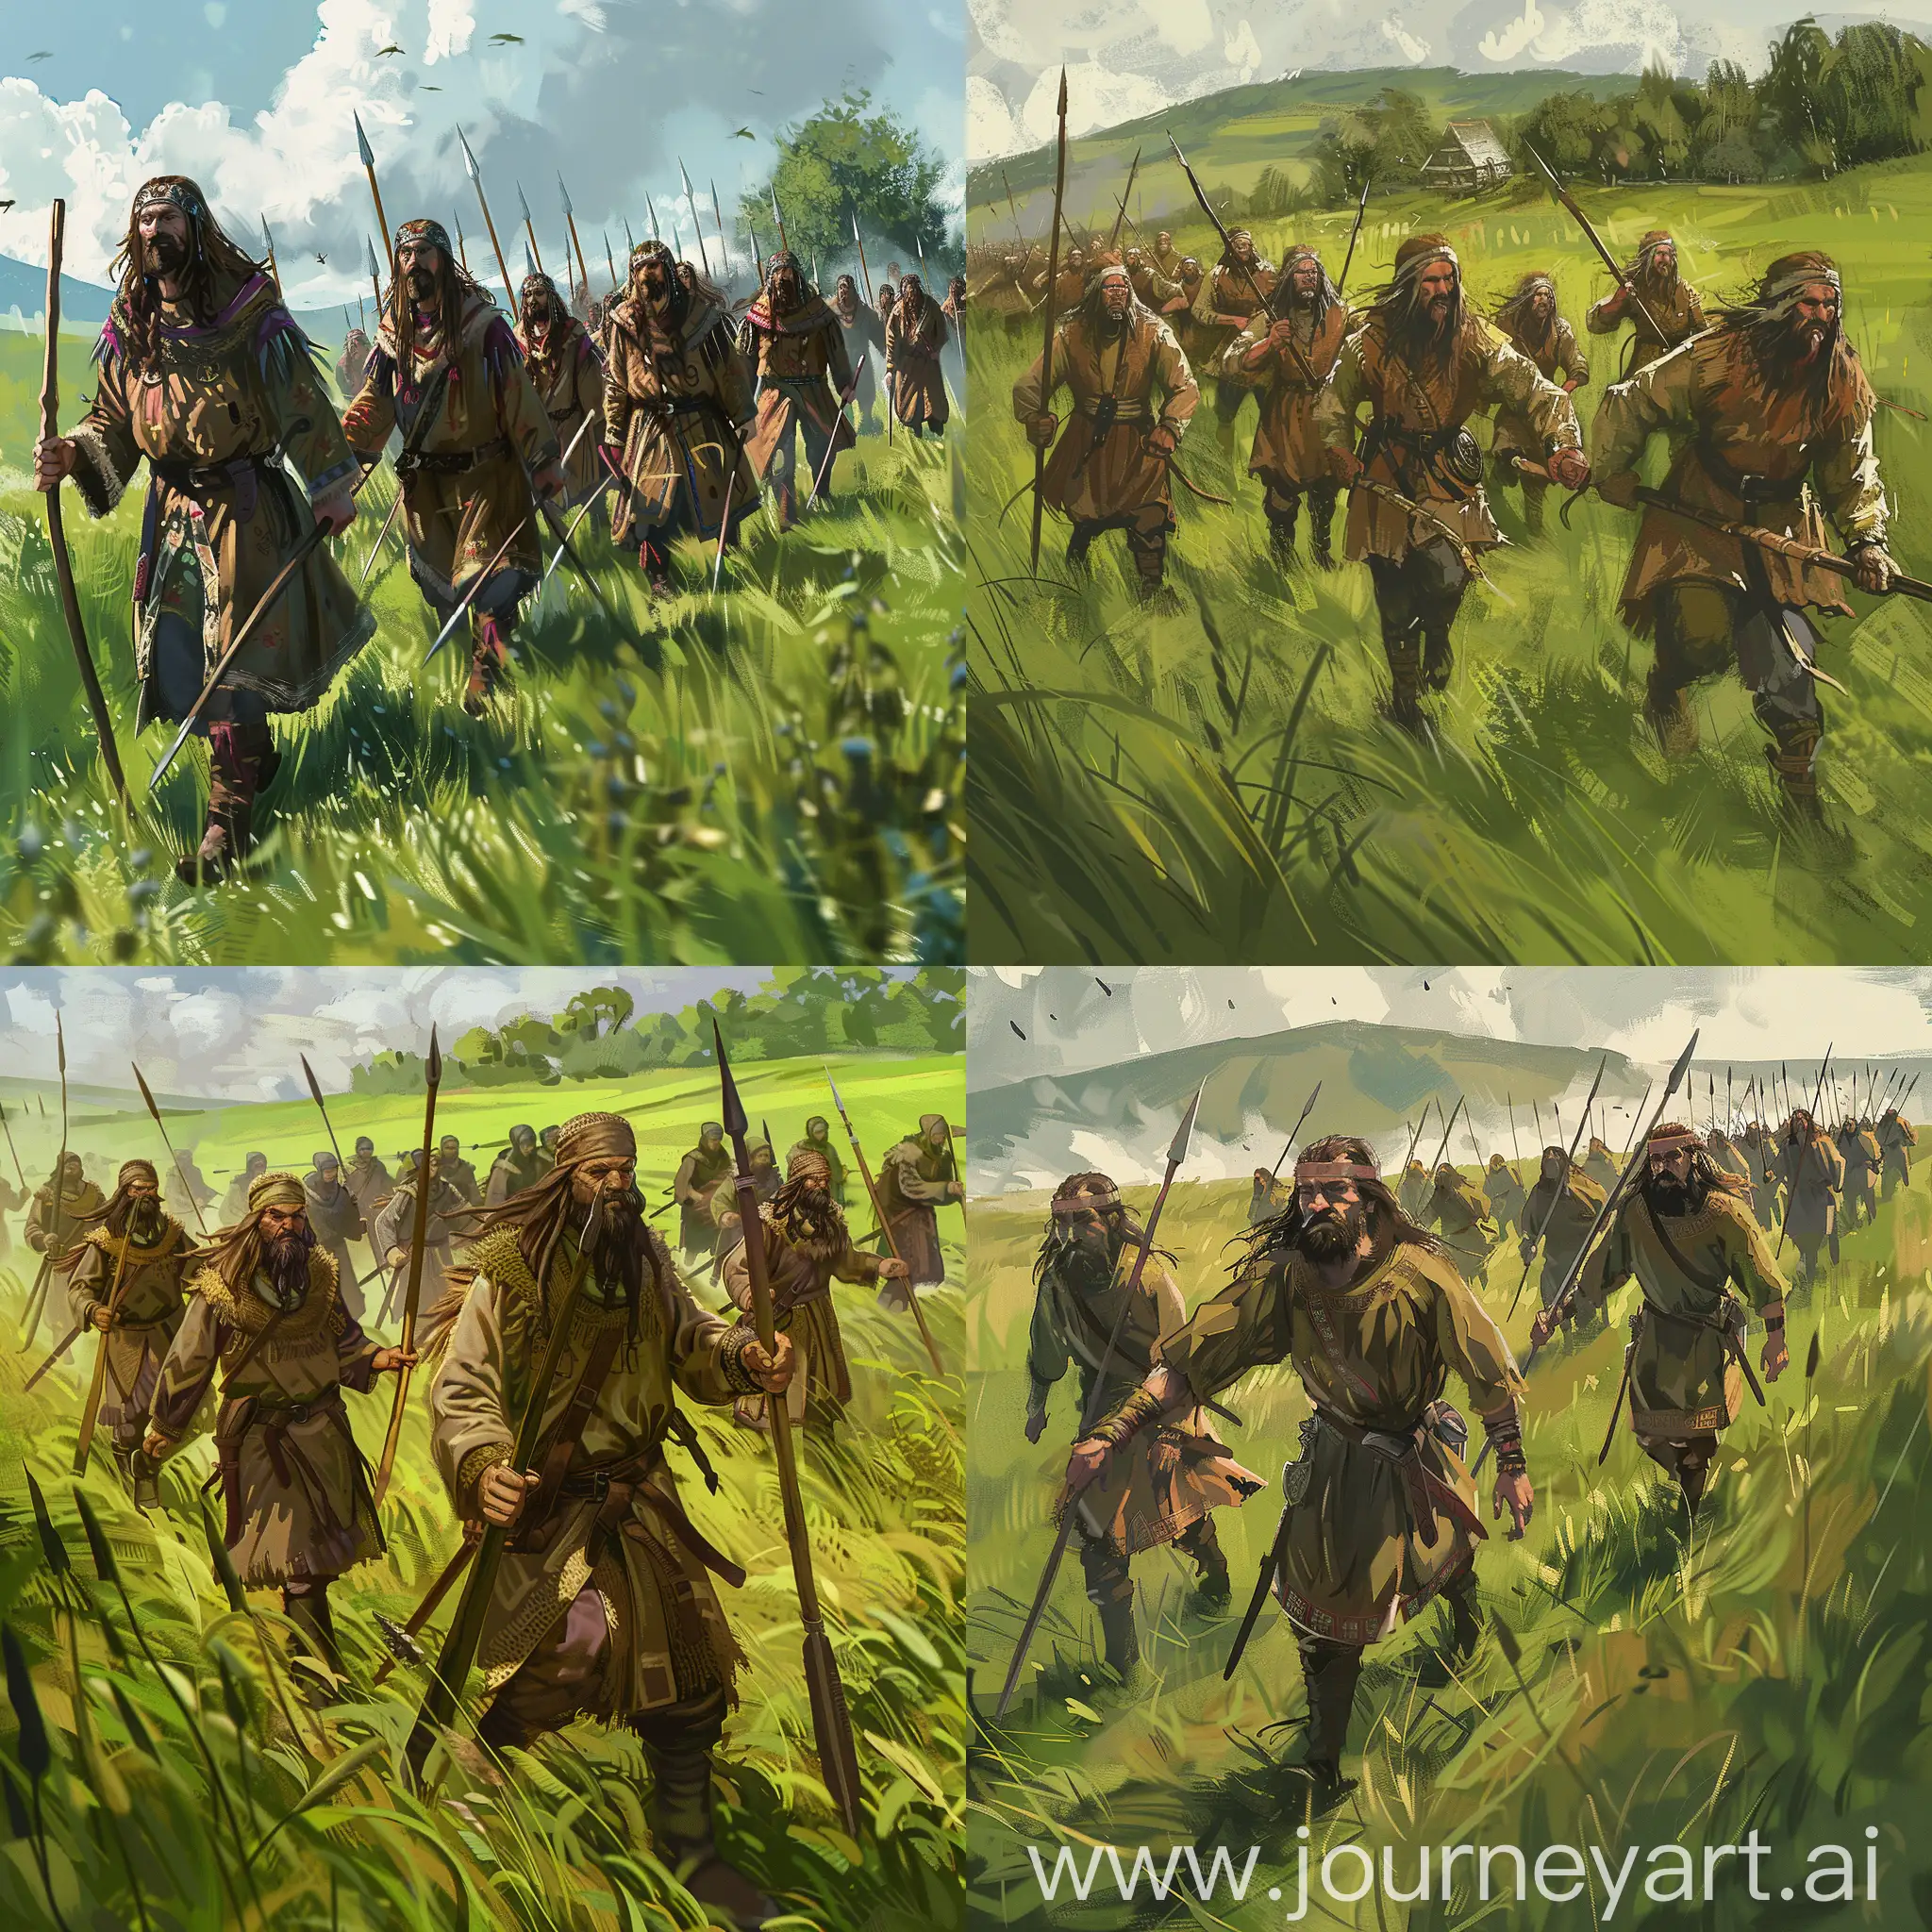 Medieval-Peasant-Army-Marching-Through-Verdant-Fields-with-Spears